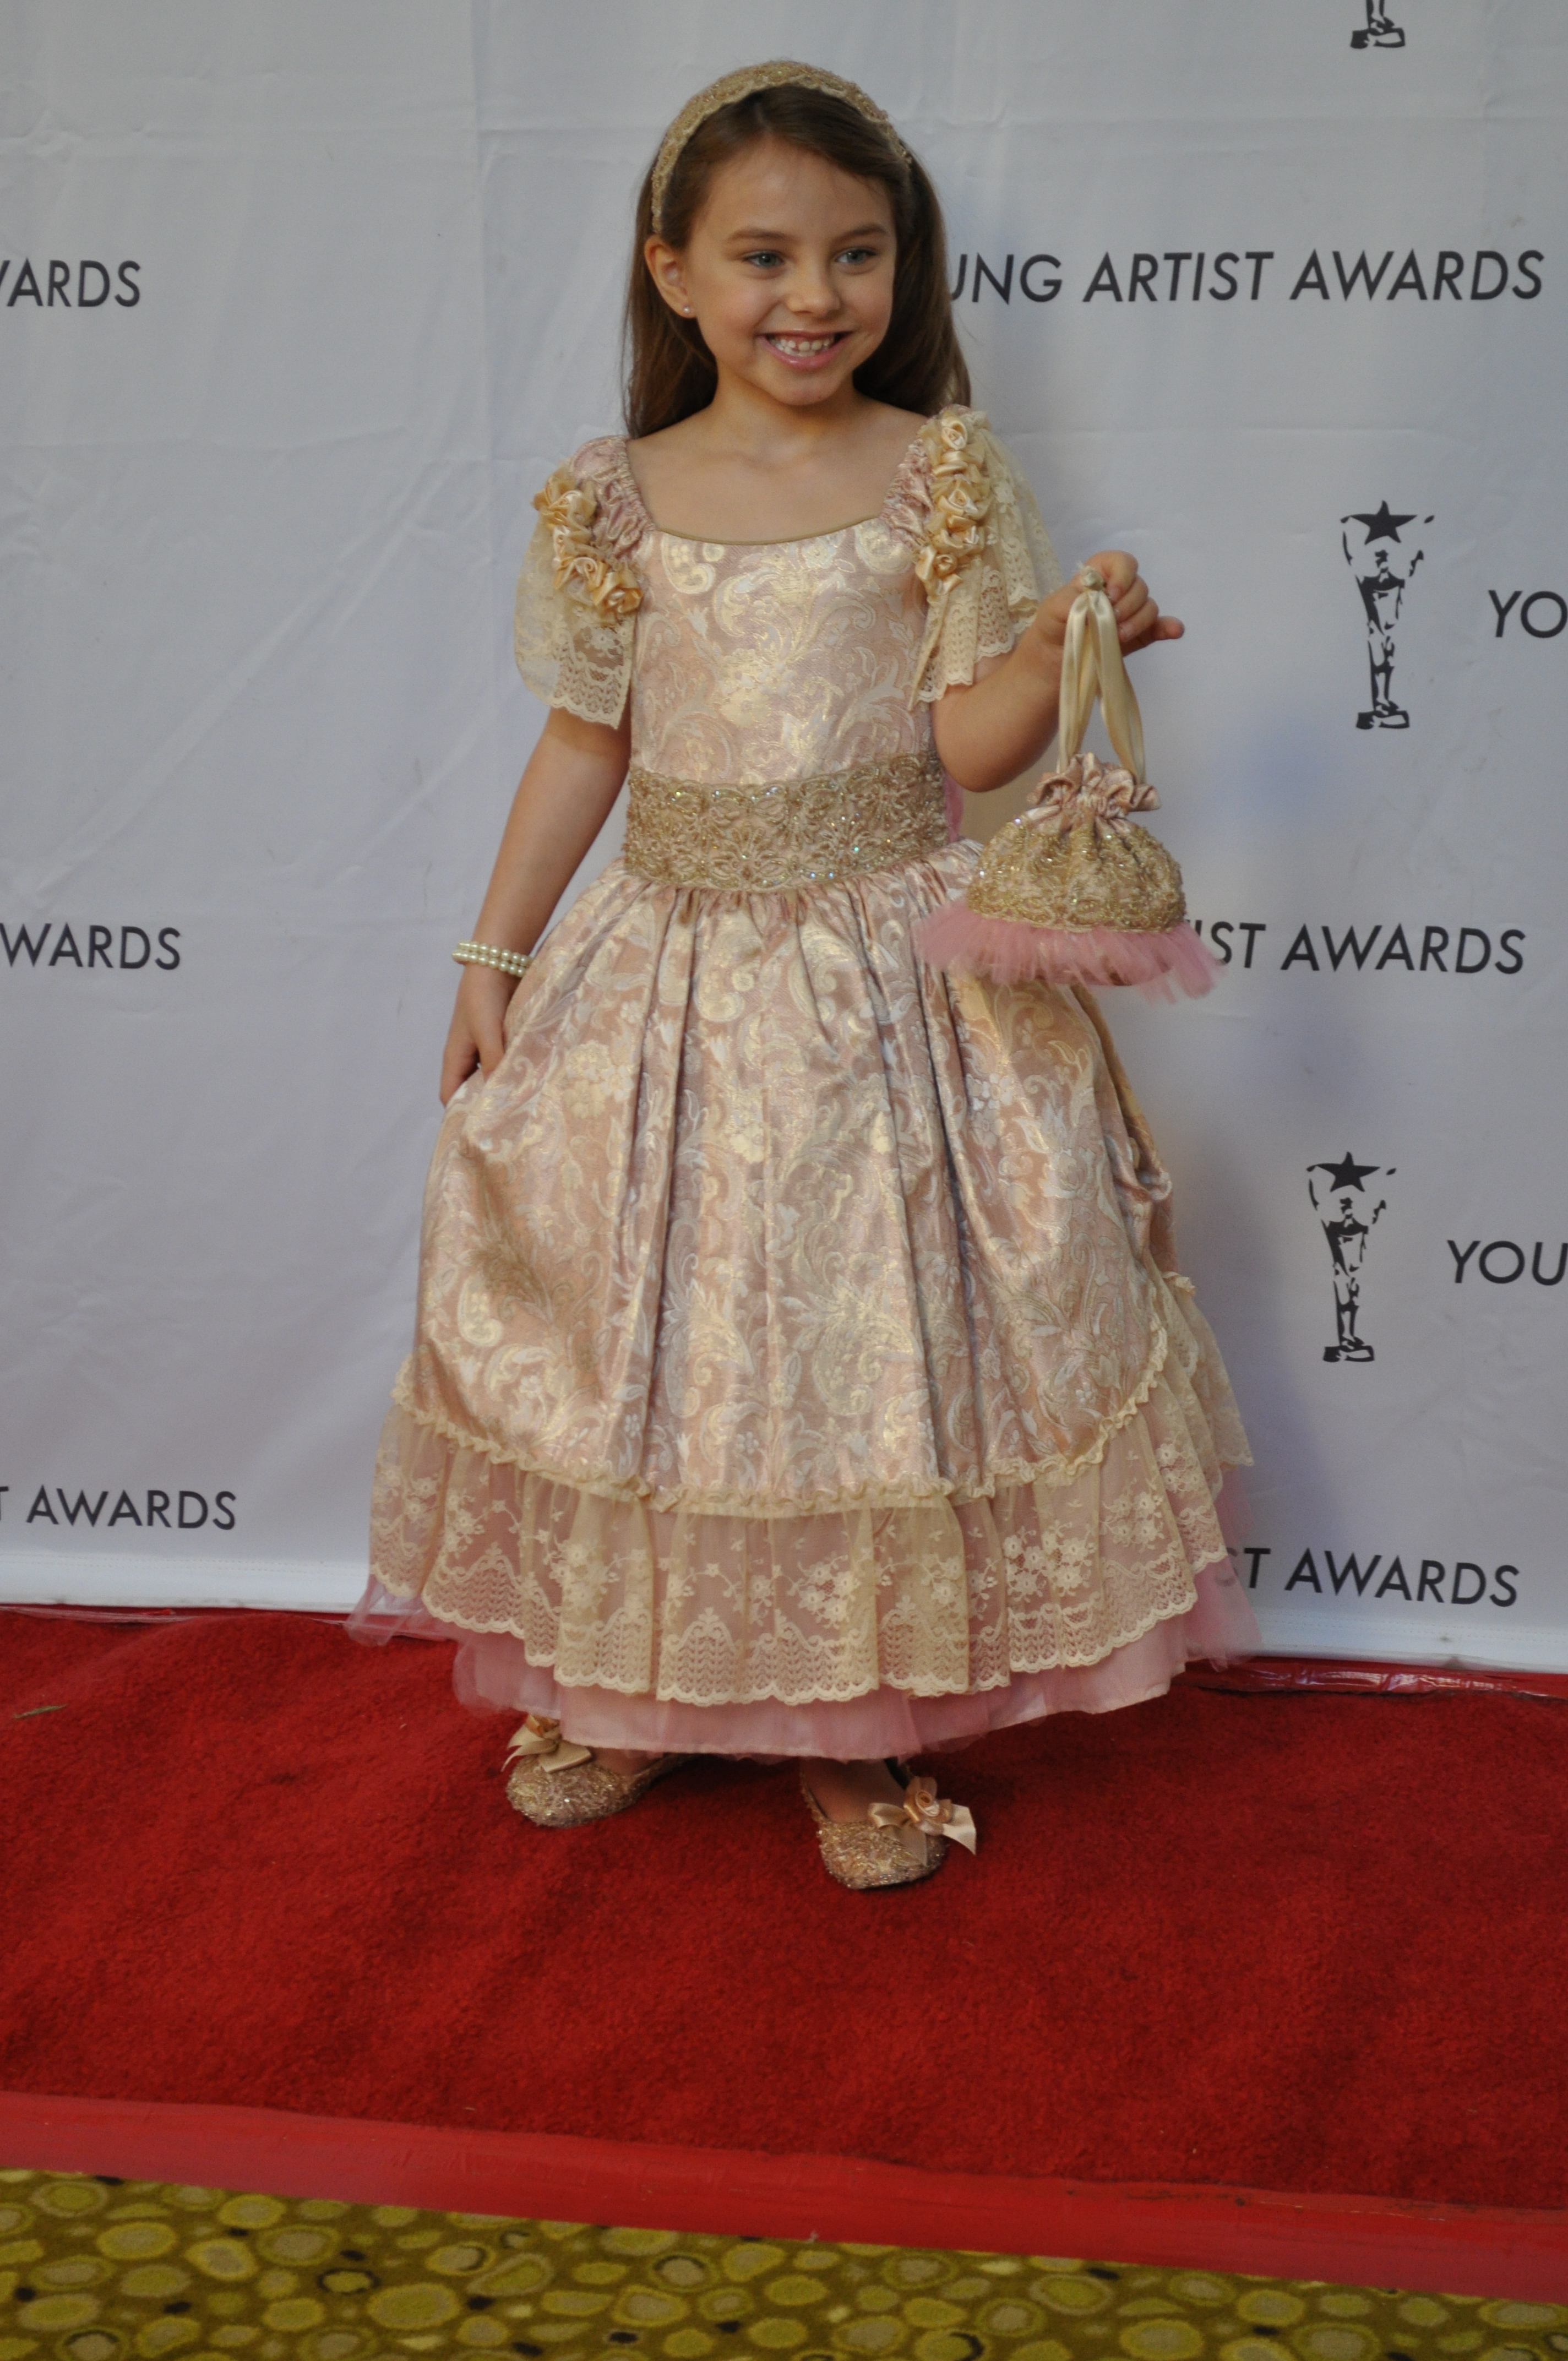 Caitlin Carmichael wearing Wanda Beauchamp dress and accessories on red carpet for Young Artist Awards March 2011